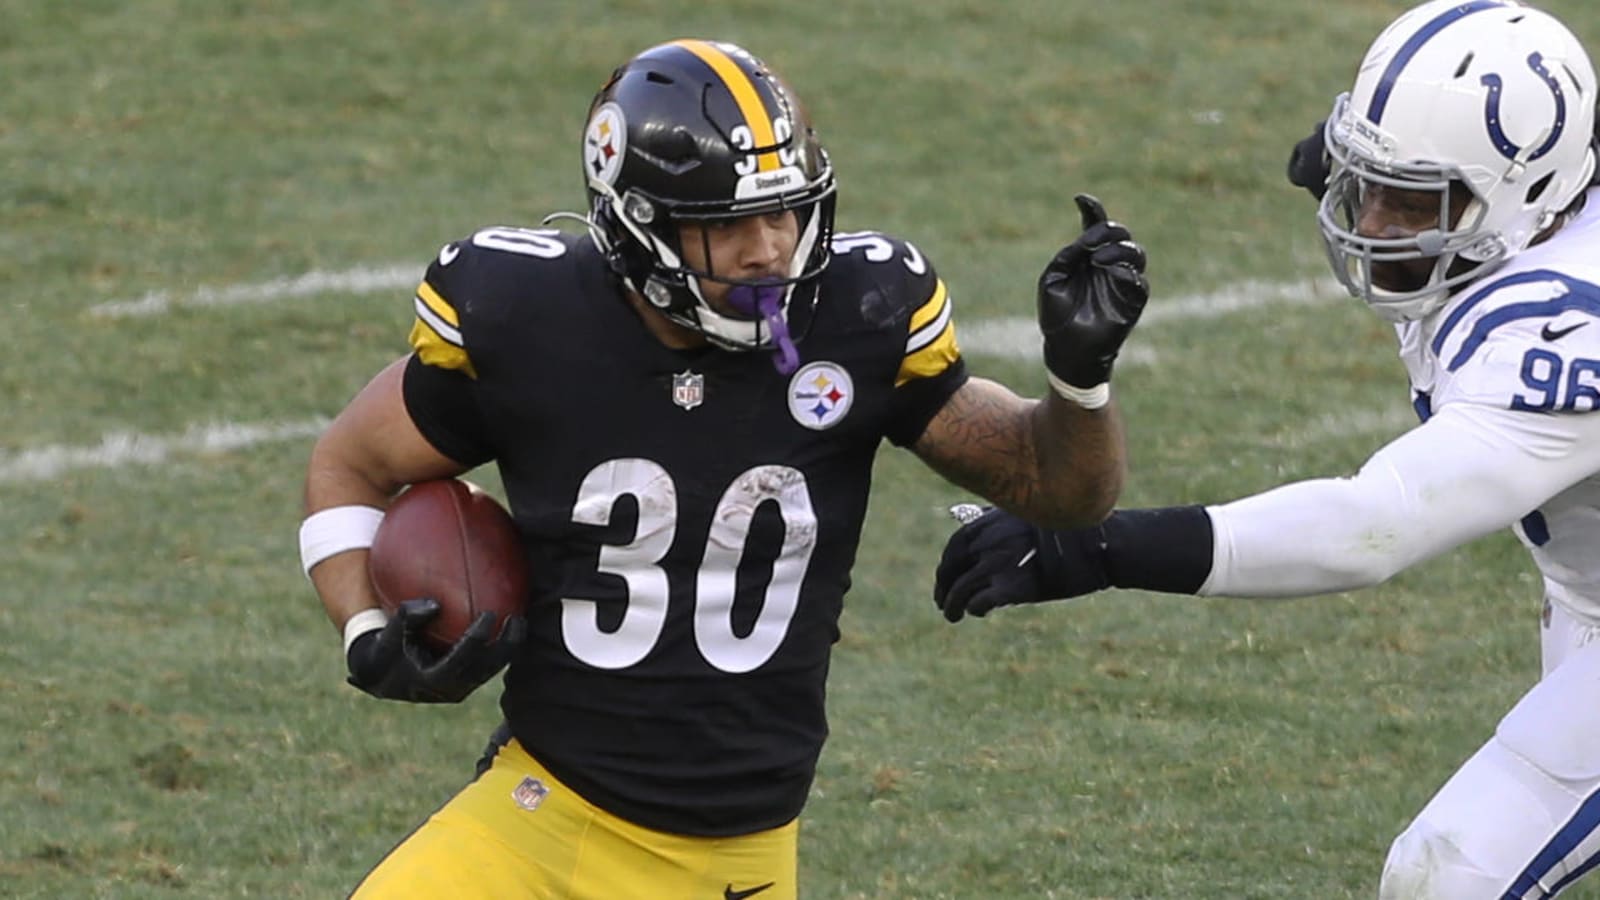 Report: James Conner underwent toe surgery after suffering off-field injury